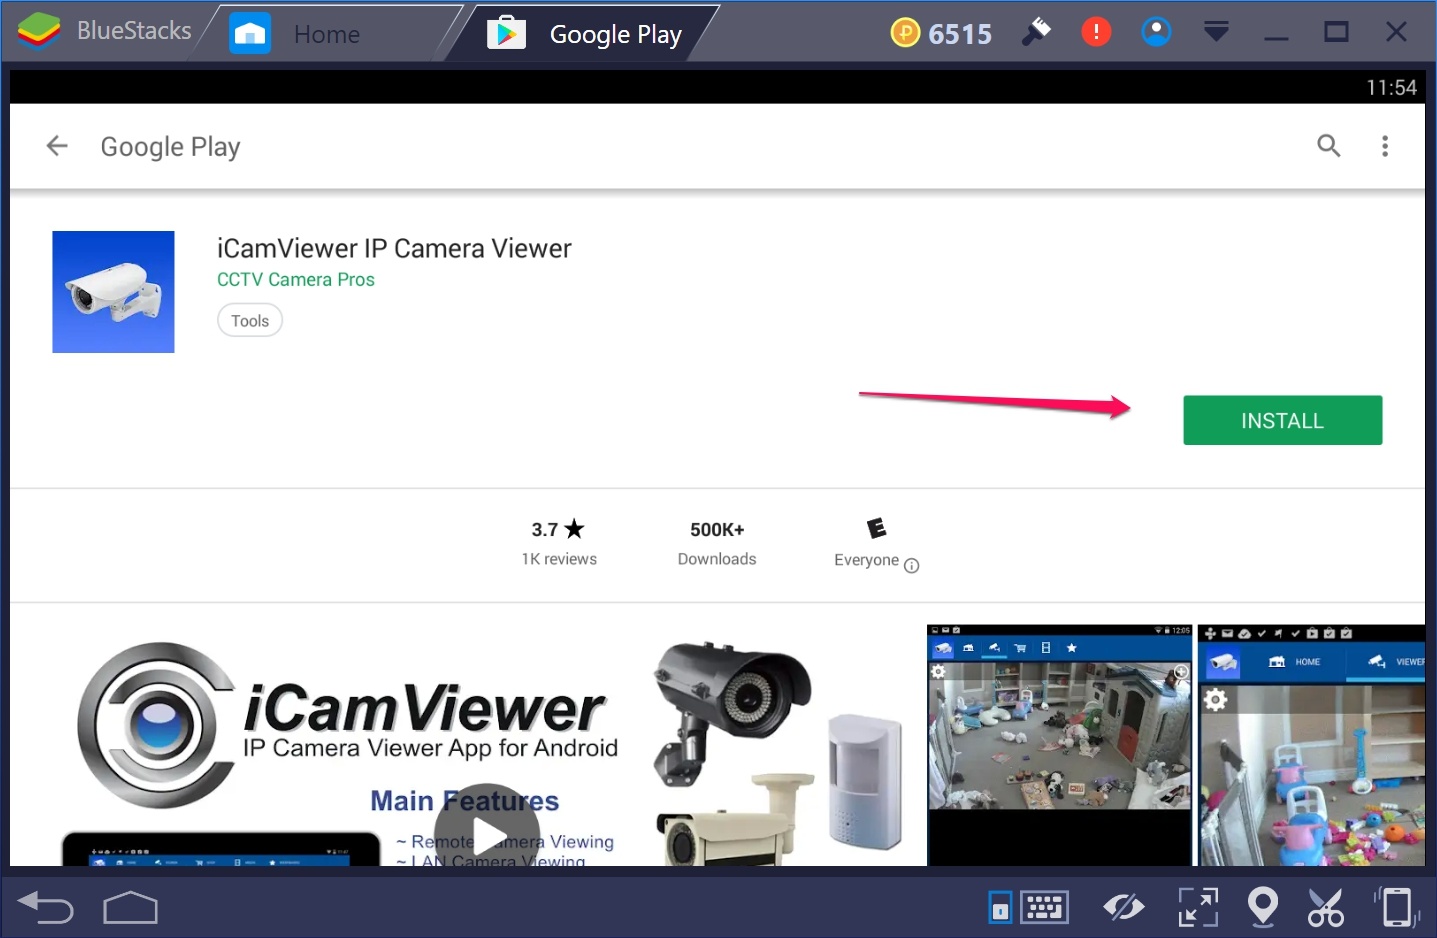 iCameraViewer IP Camera Viewer for Windows 10 PC 